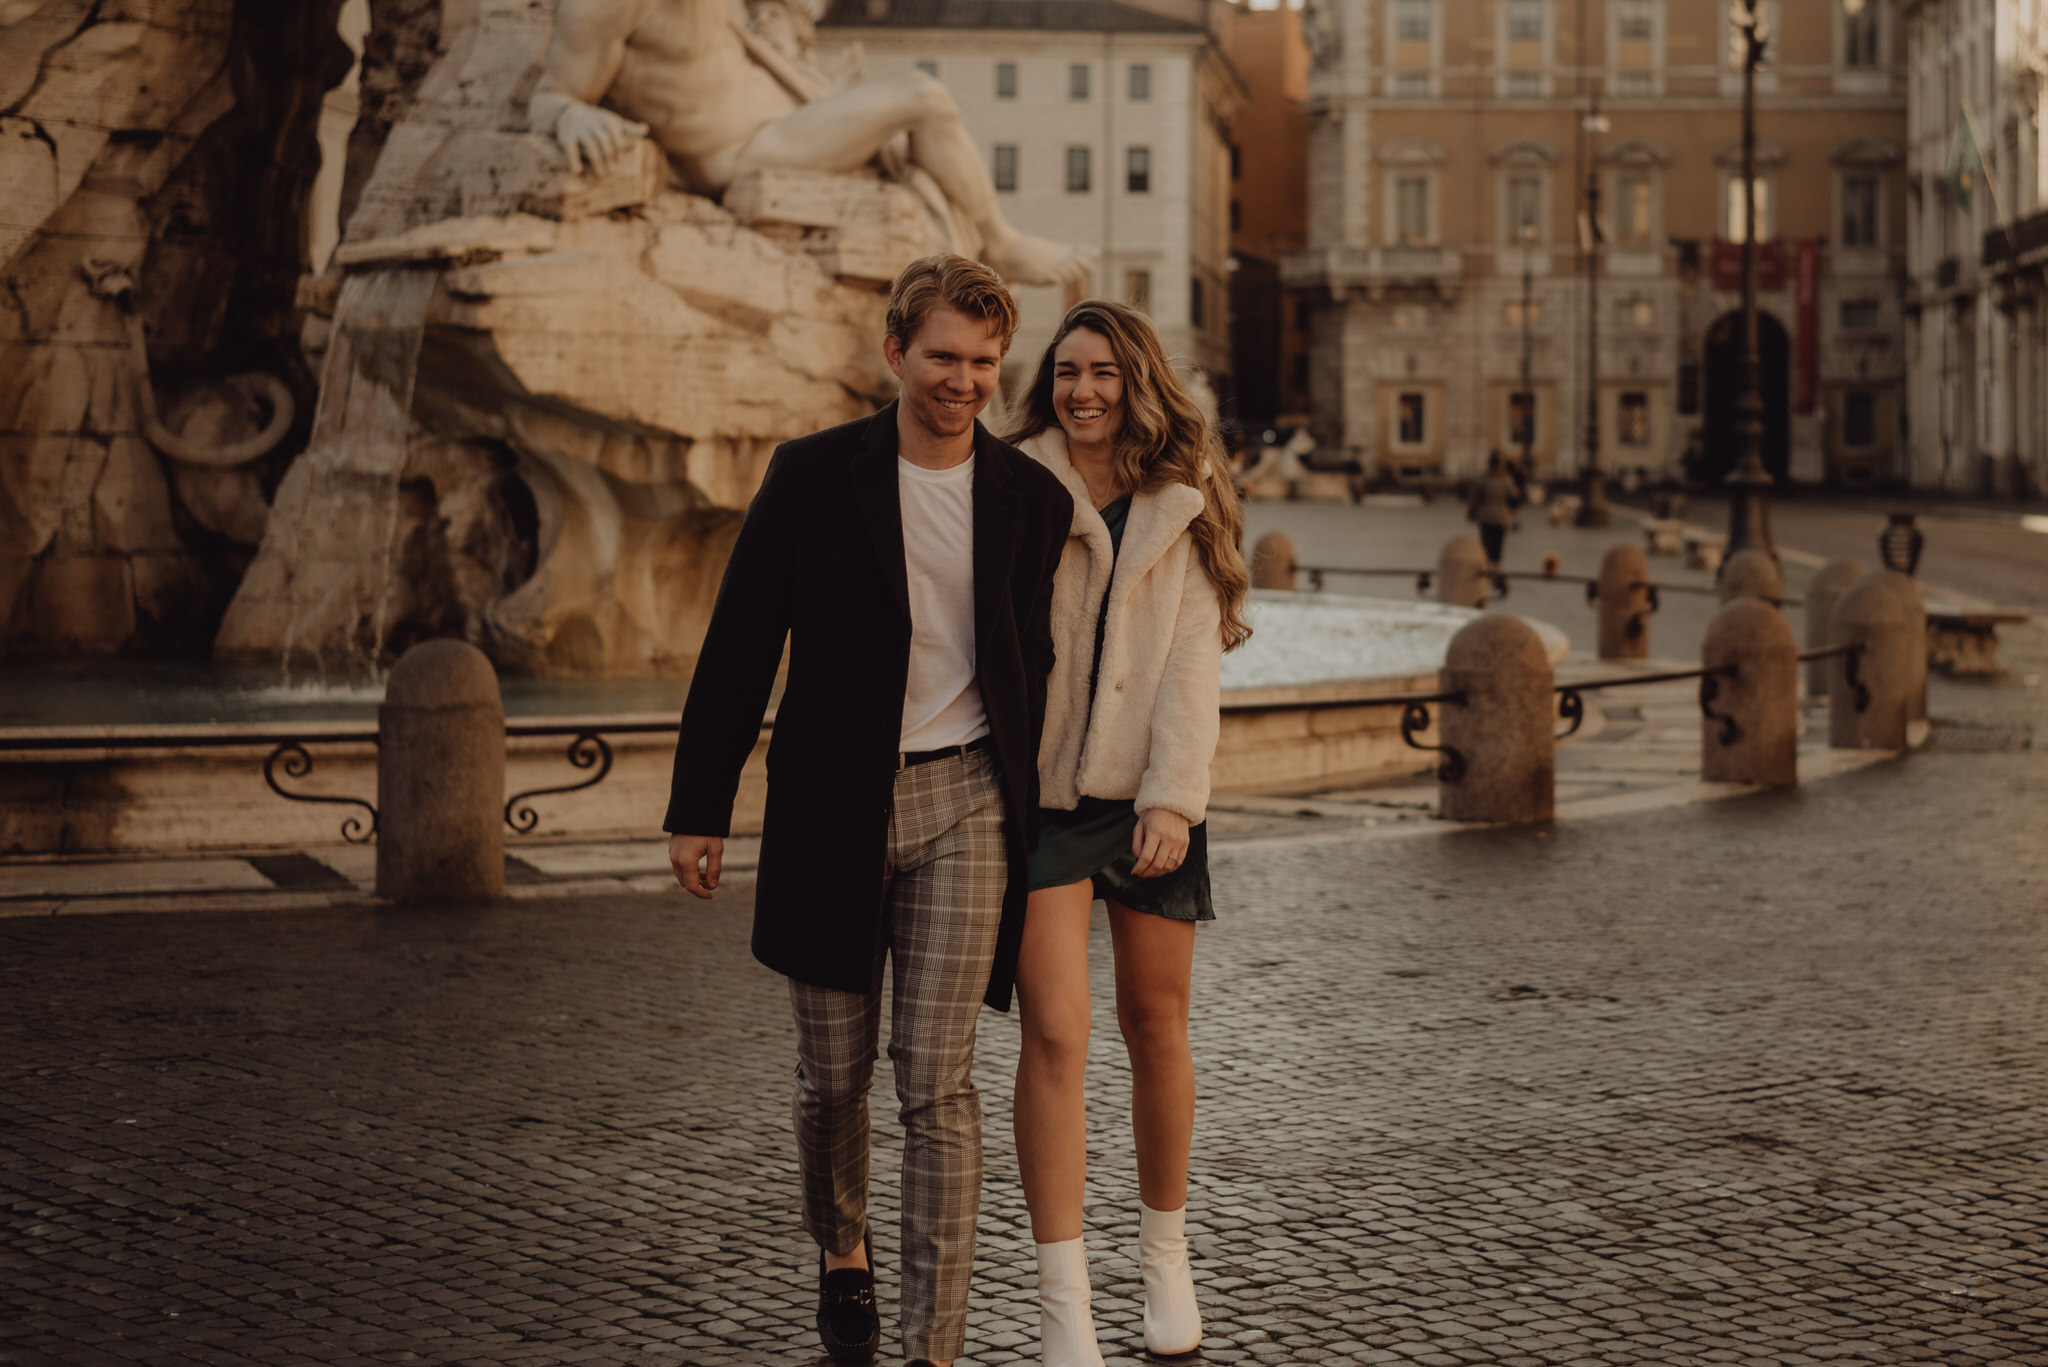 Couple photoshoot in Rome at the iconic Piazza Navona